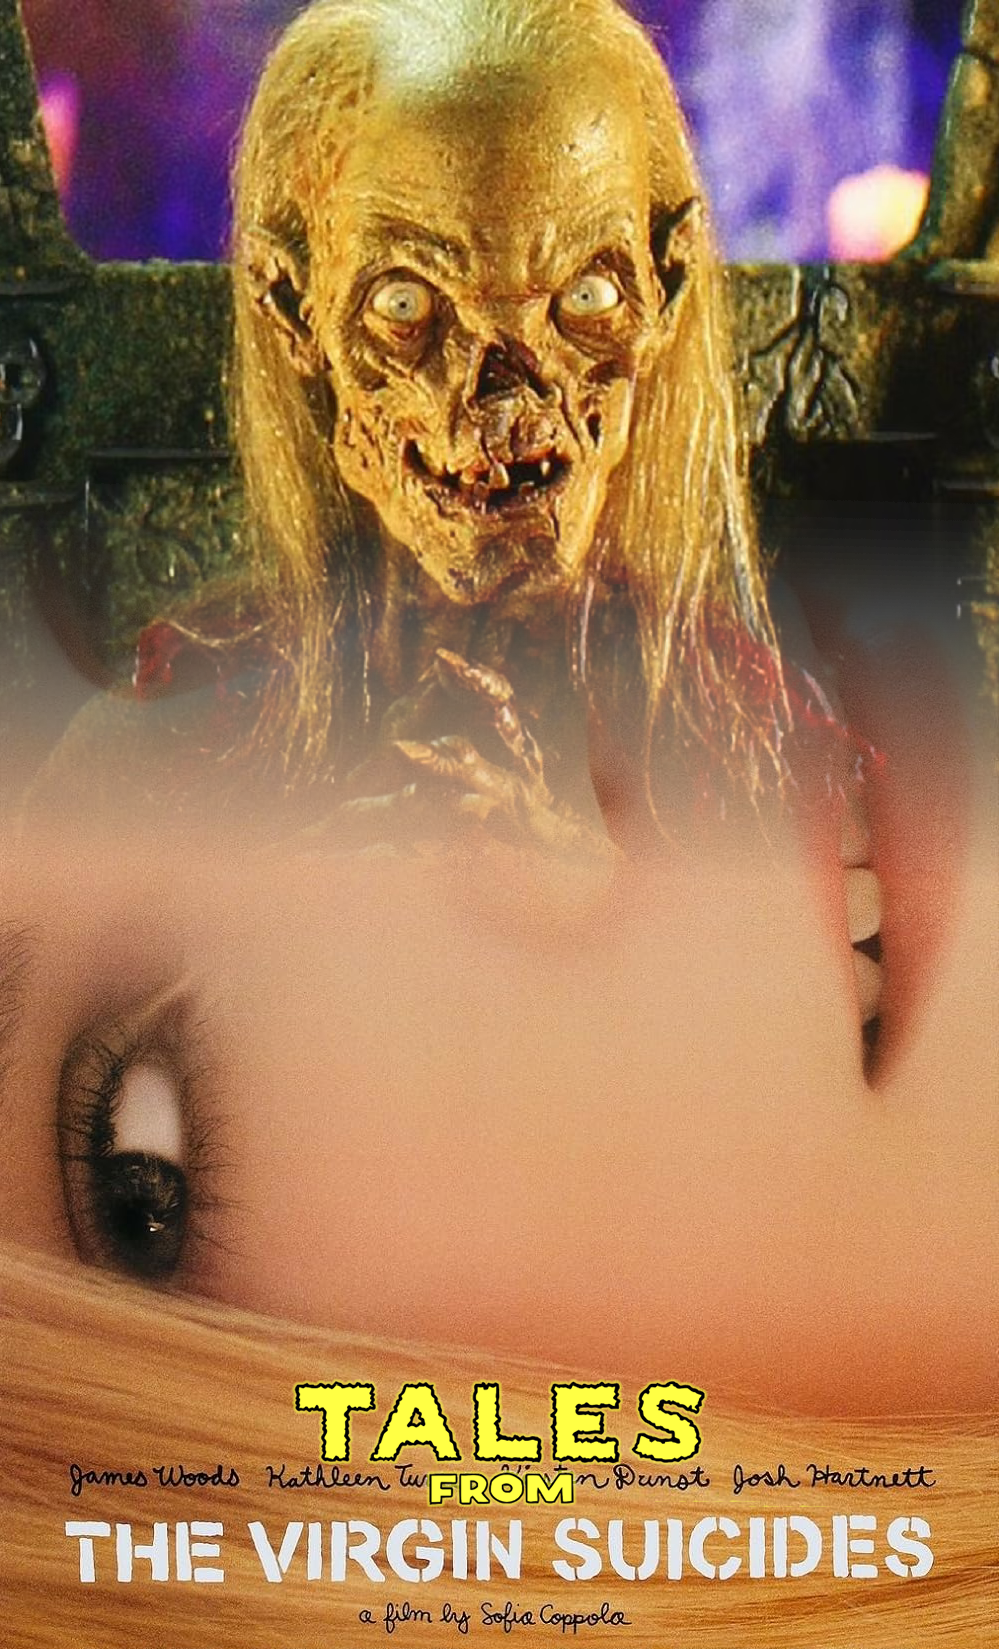 A mash-up of advertising for "Tales from the Crypt" and "The Virgin Suicides" yielding "Takes from the Virgin Suicides"